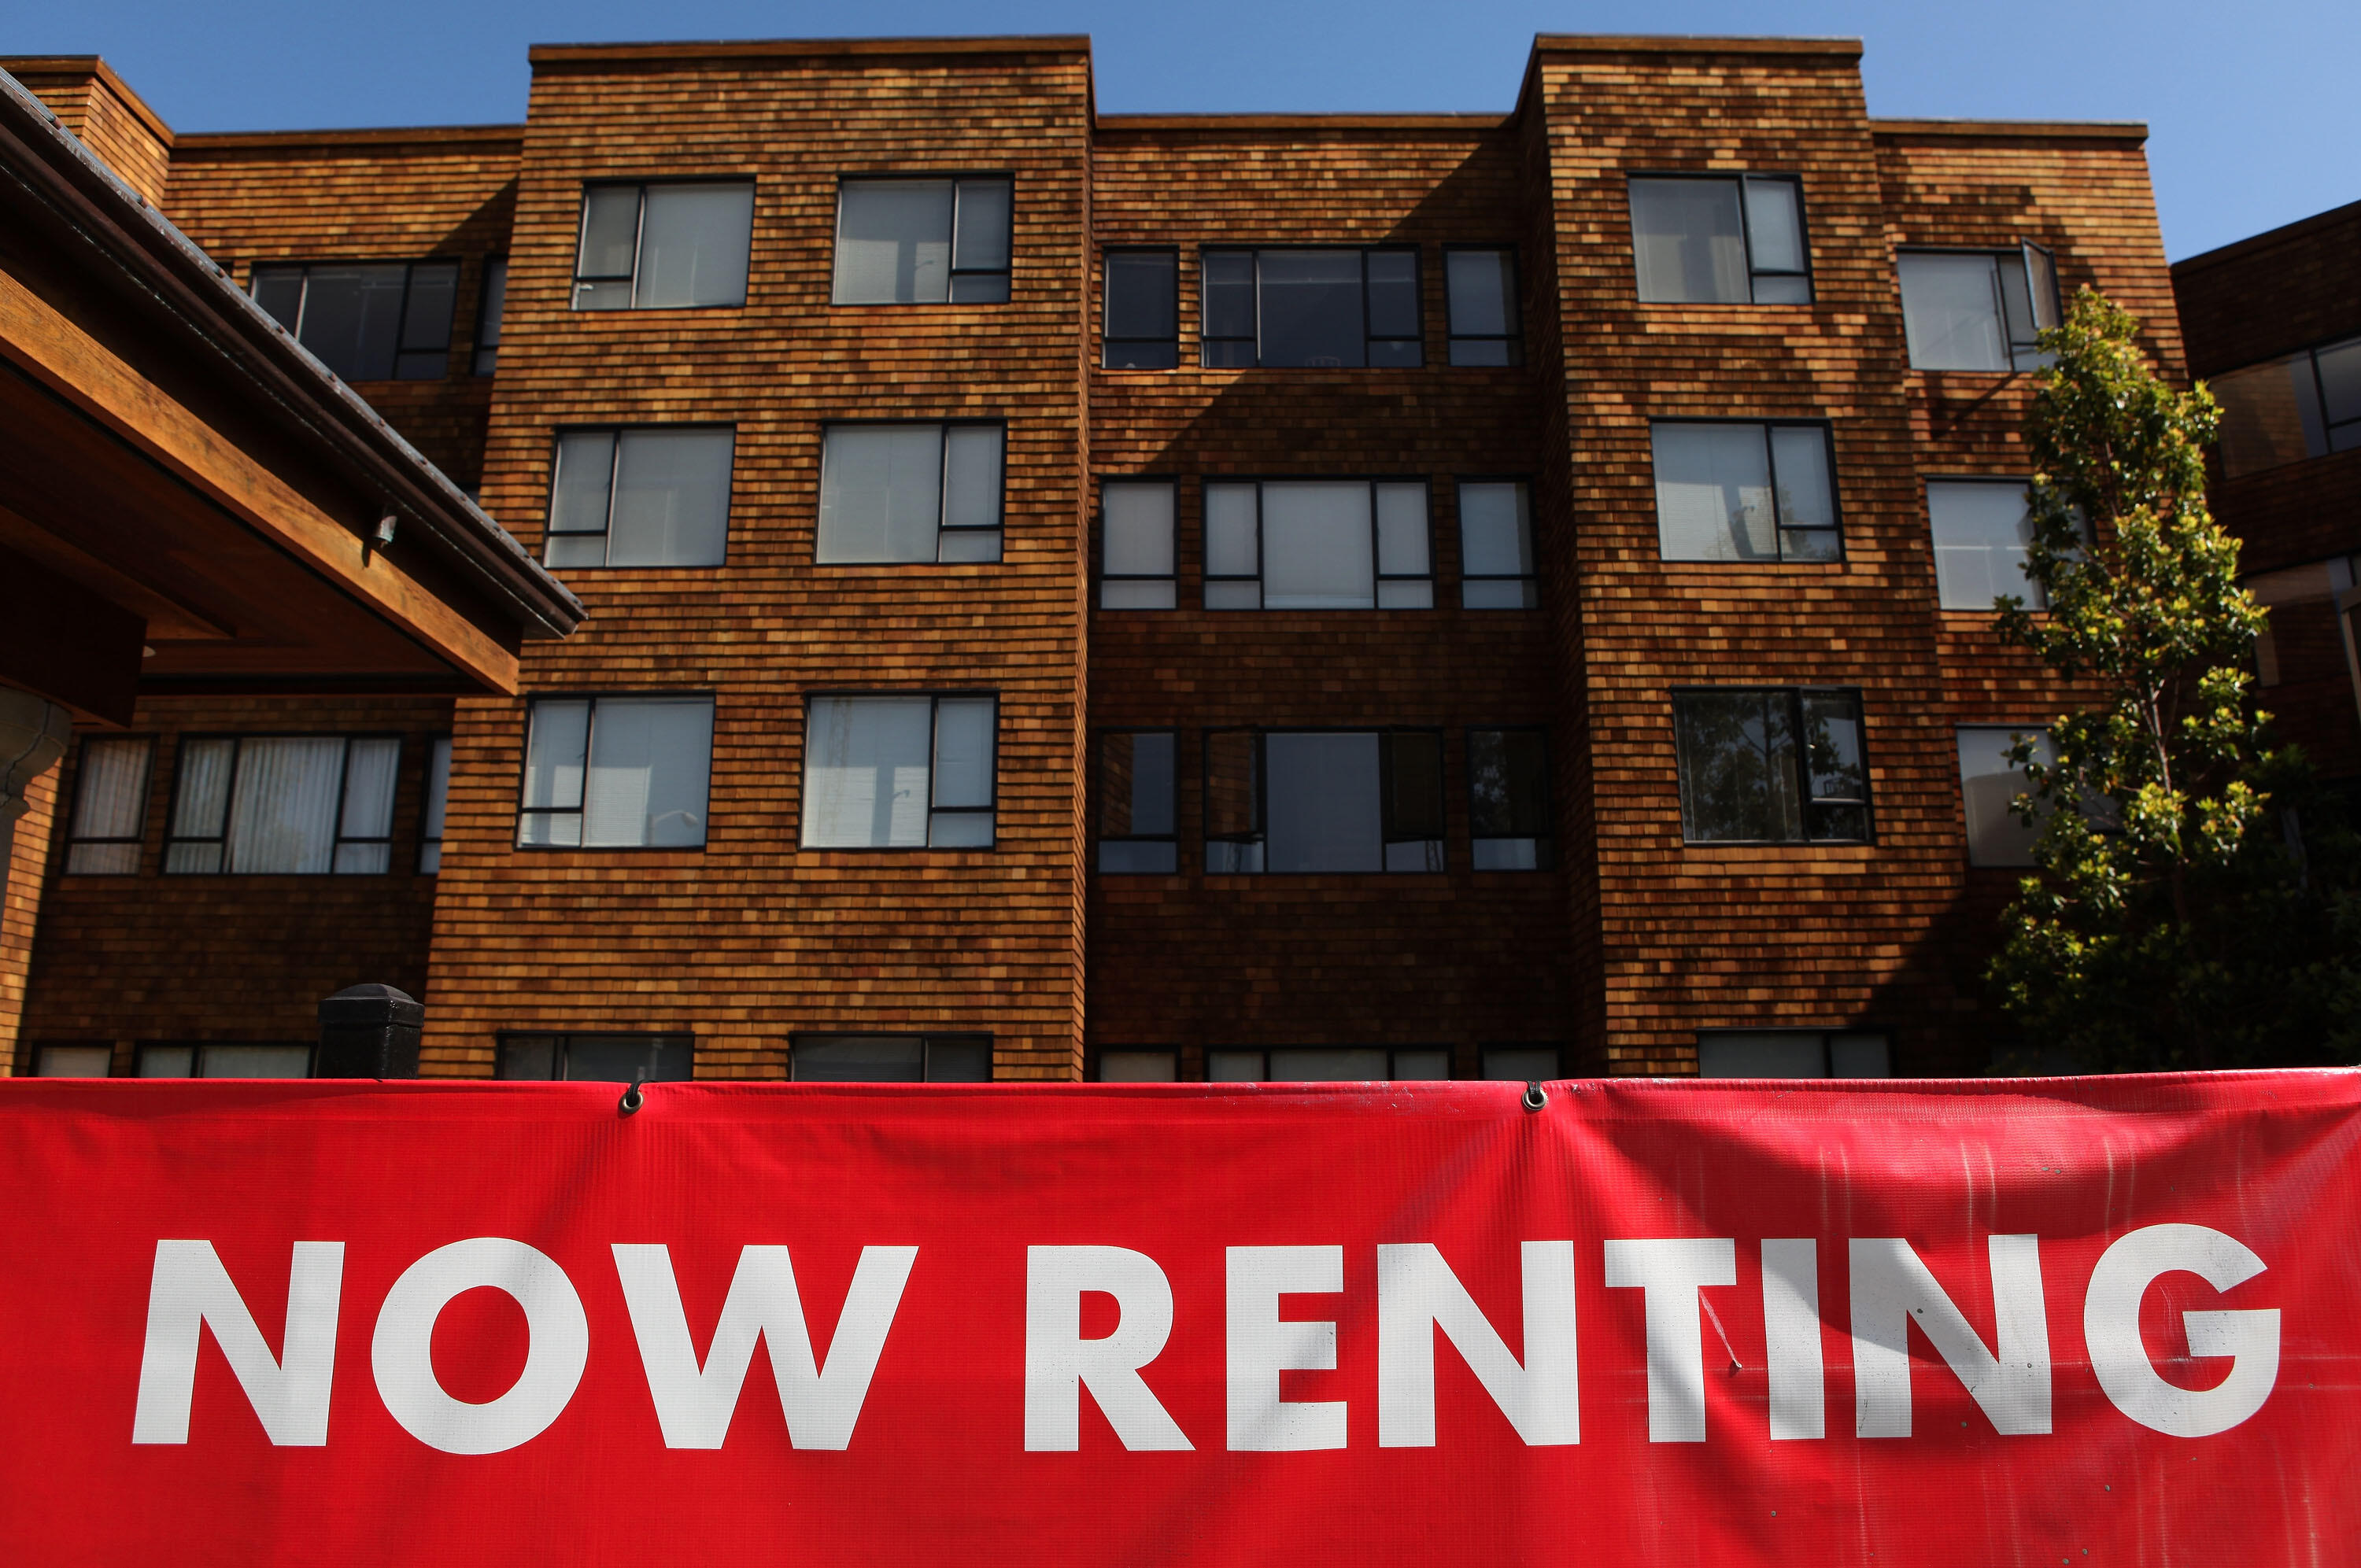 SAN FRANCISCO - JULY 08:  A sign advertising  apartments for rent is displayed in front of an apartment complex July 8, 2009 in San Francisco, California. As the economy continues to falter, vacancy rates for U.S. apartments have spiked to a twenty two ye